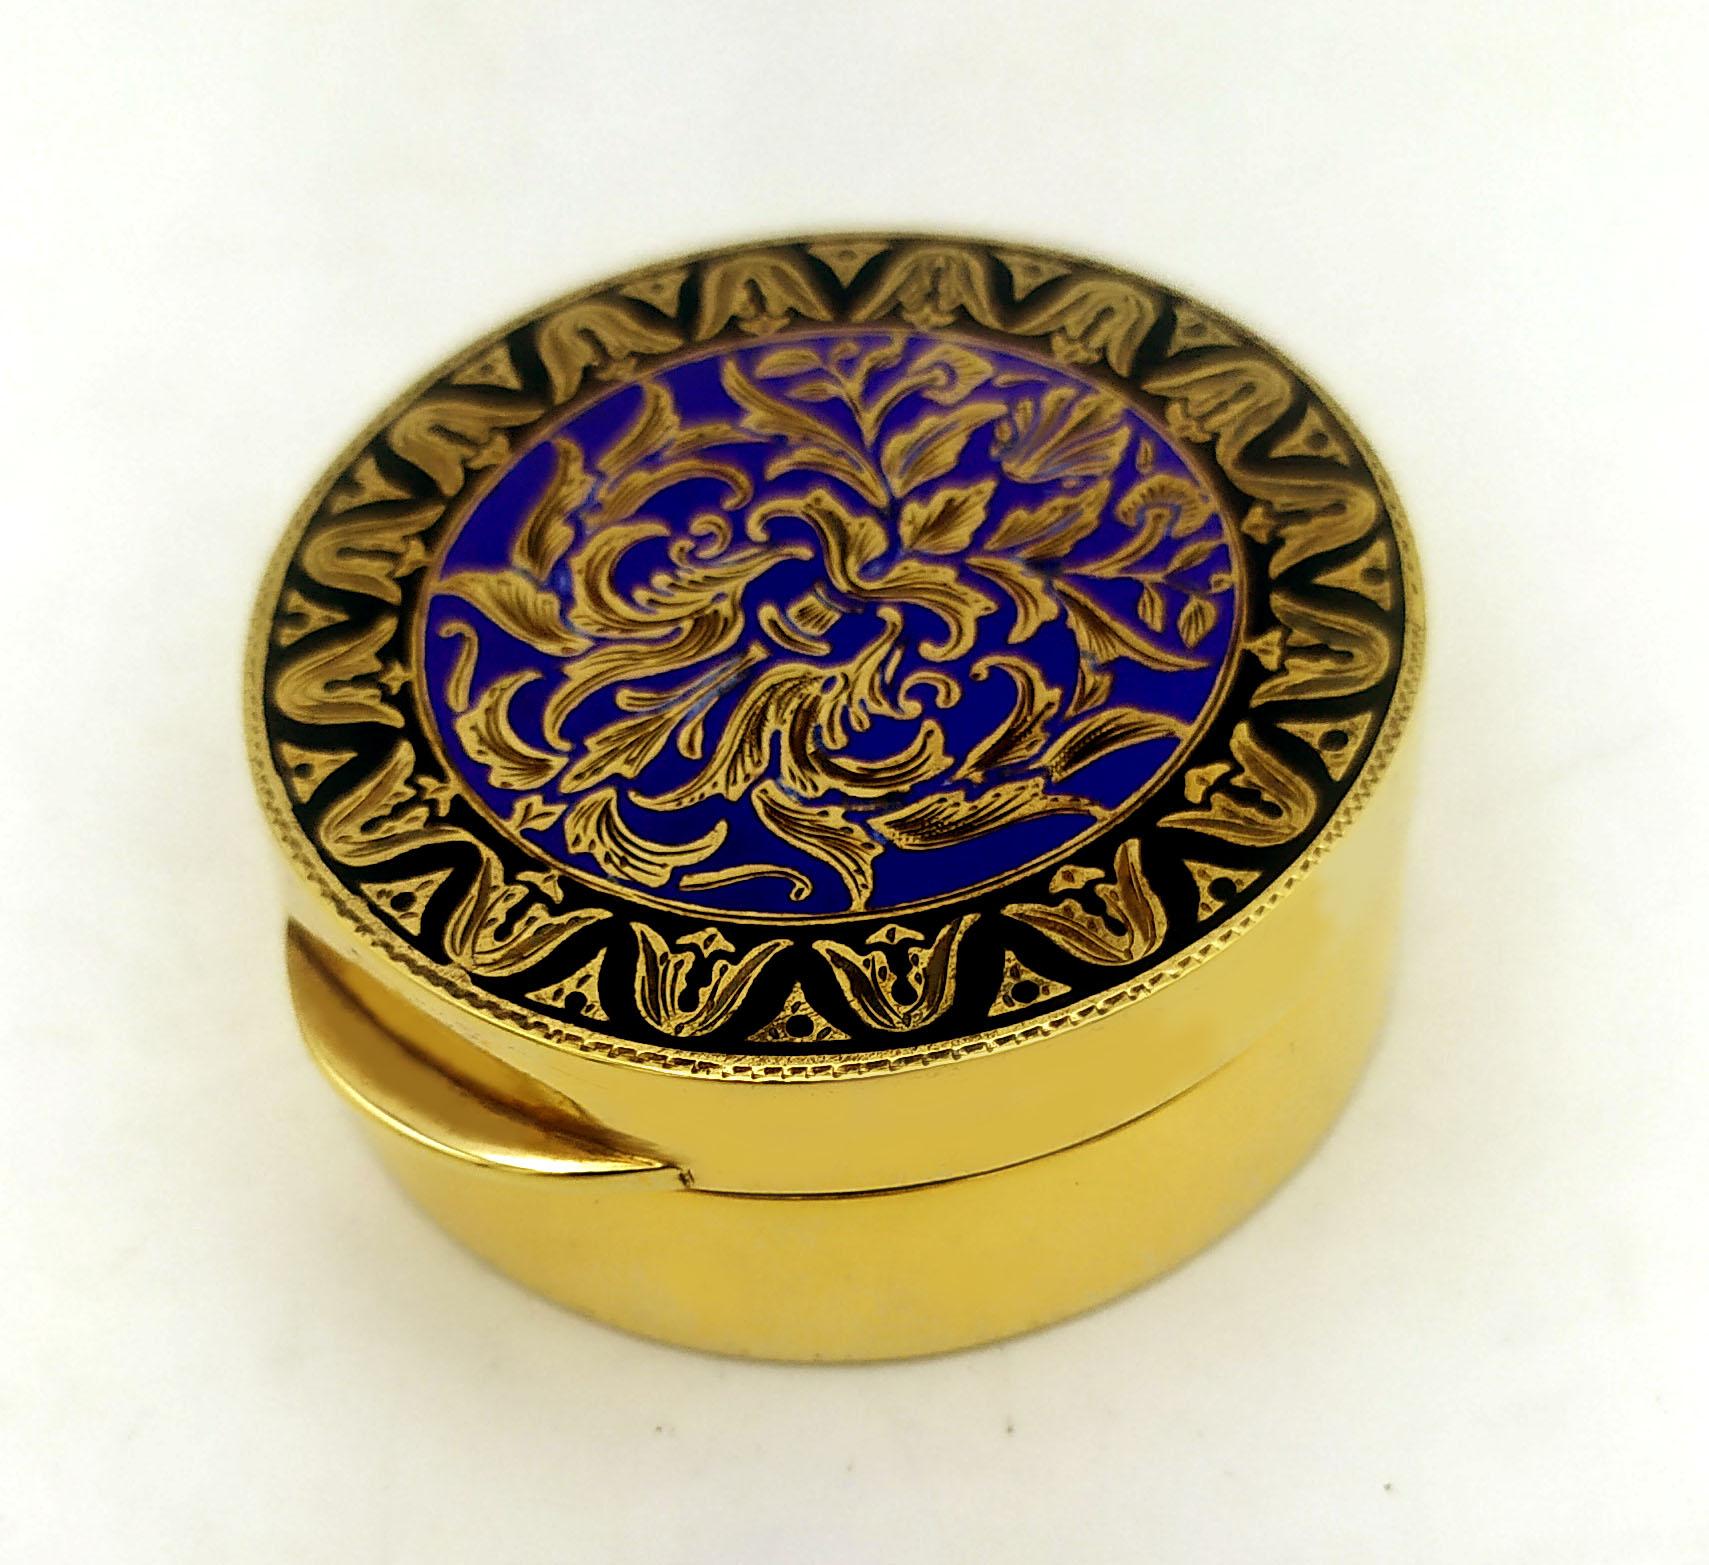 Large round pillbox in 925/1000 sterling silver gold plated with fine fire-enamelled engraving in two colours, in Florentine Renaissance style. Diameter cm. 5 cm high. 2. Weight gr. 79. Designed by Franco Salimbeni in 1988 and produced in various